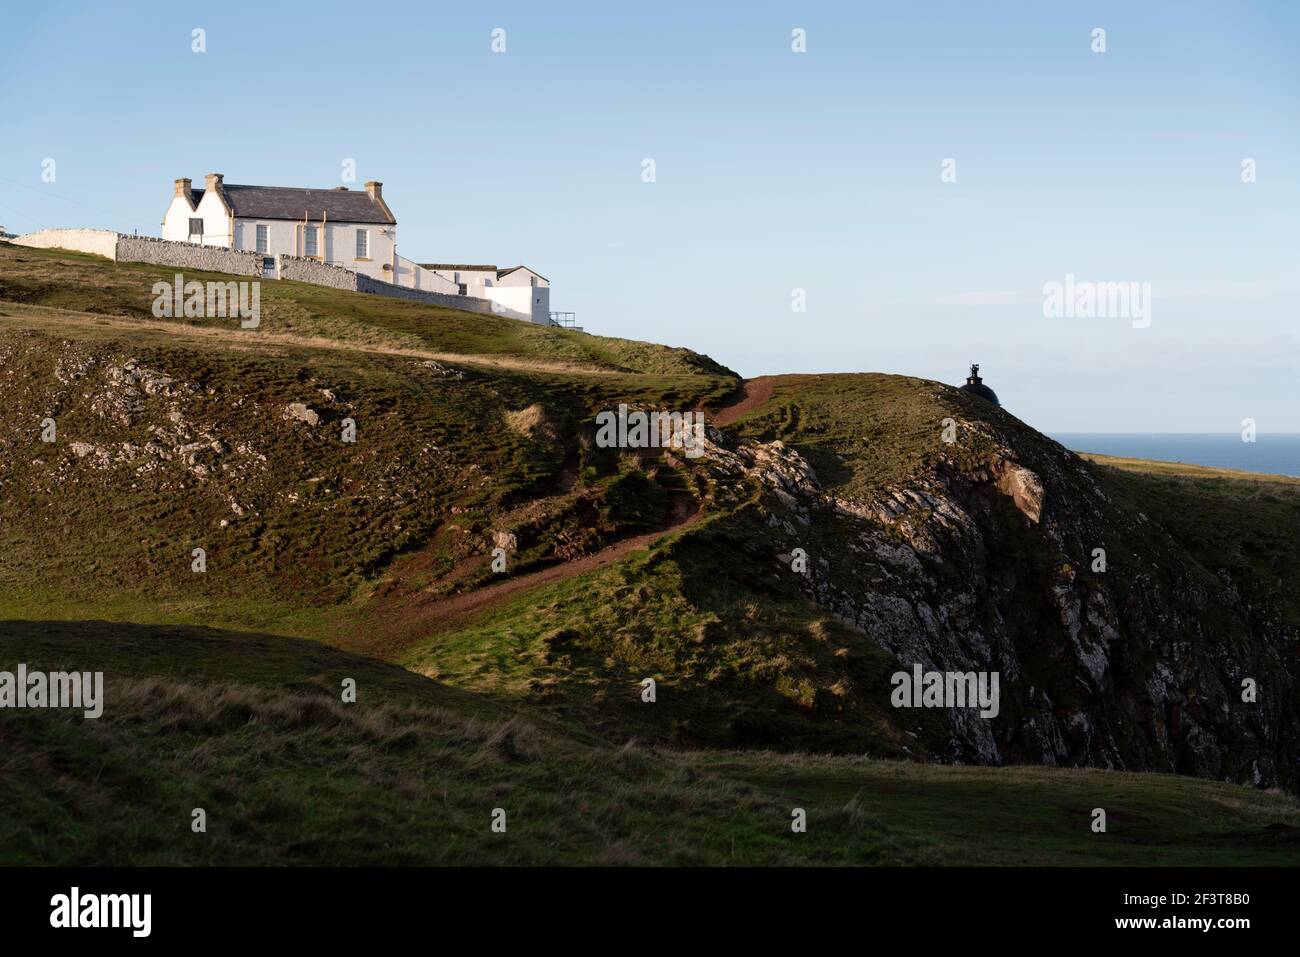 St Abbs, Berwickshire, Scotland - North Sea fishing village and nature reserve - Lighthouse and cottage Stock Photo